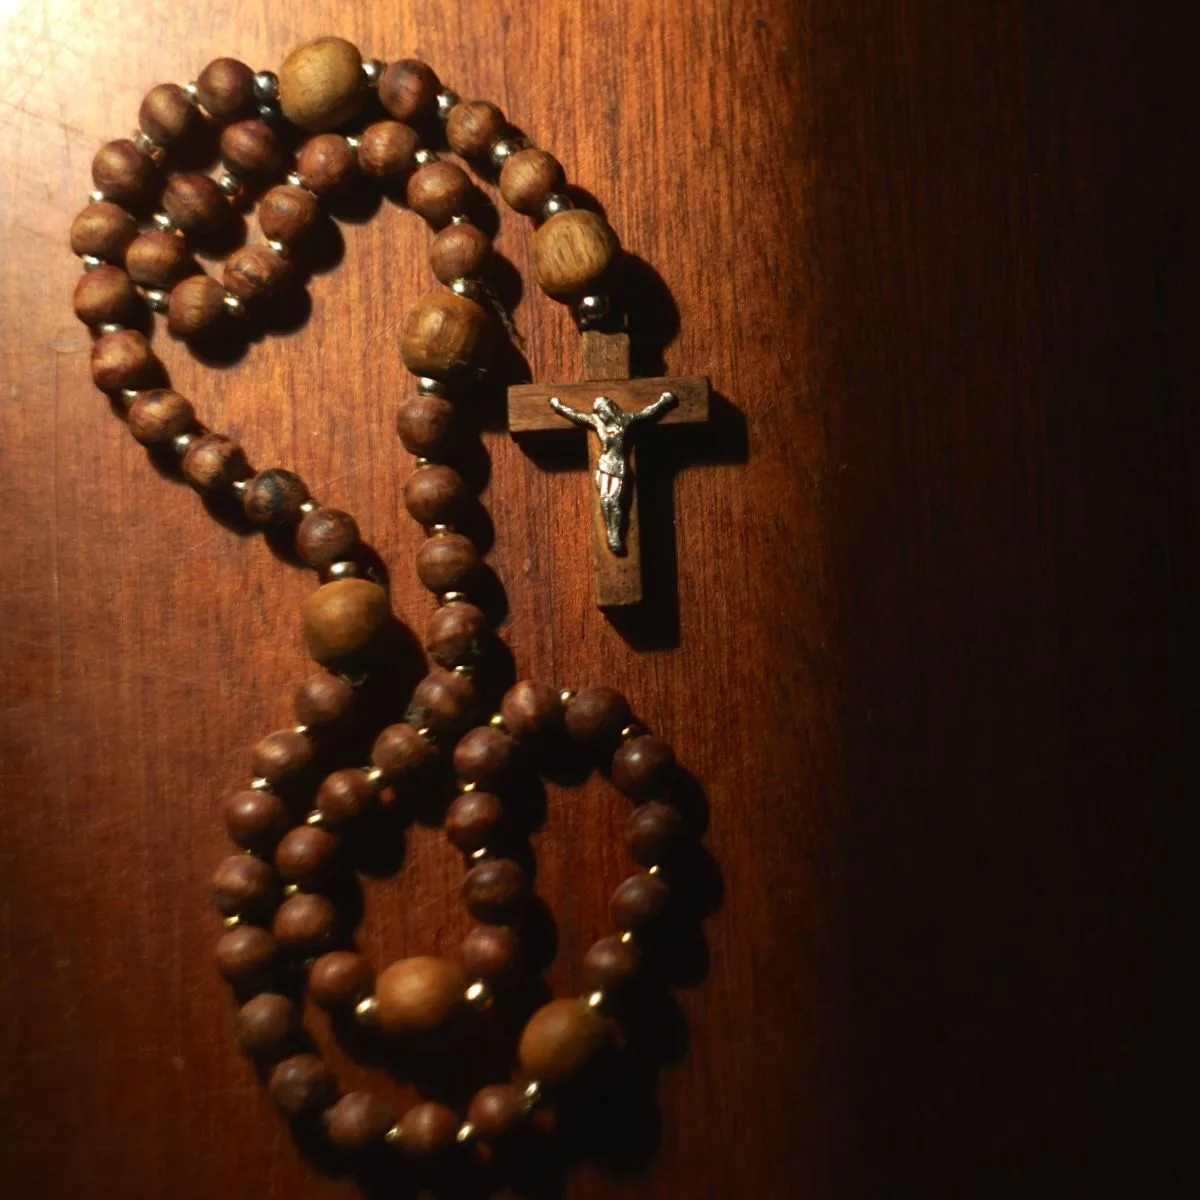 spiritual meaning of finding a rosary